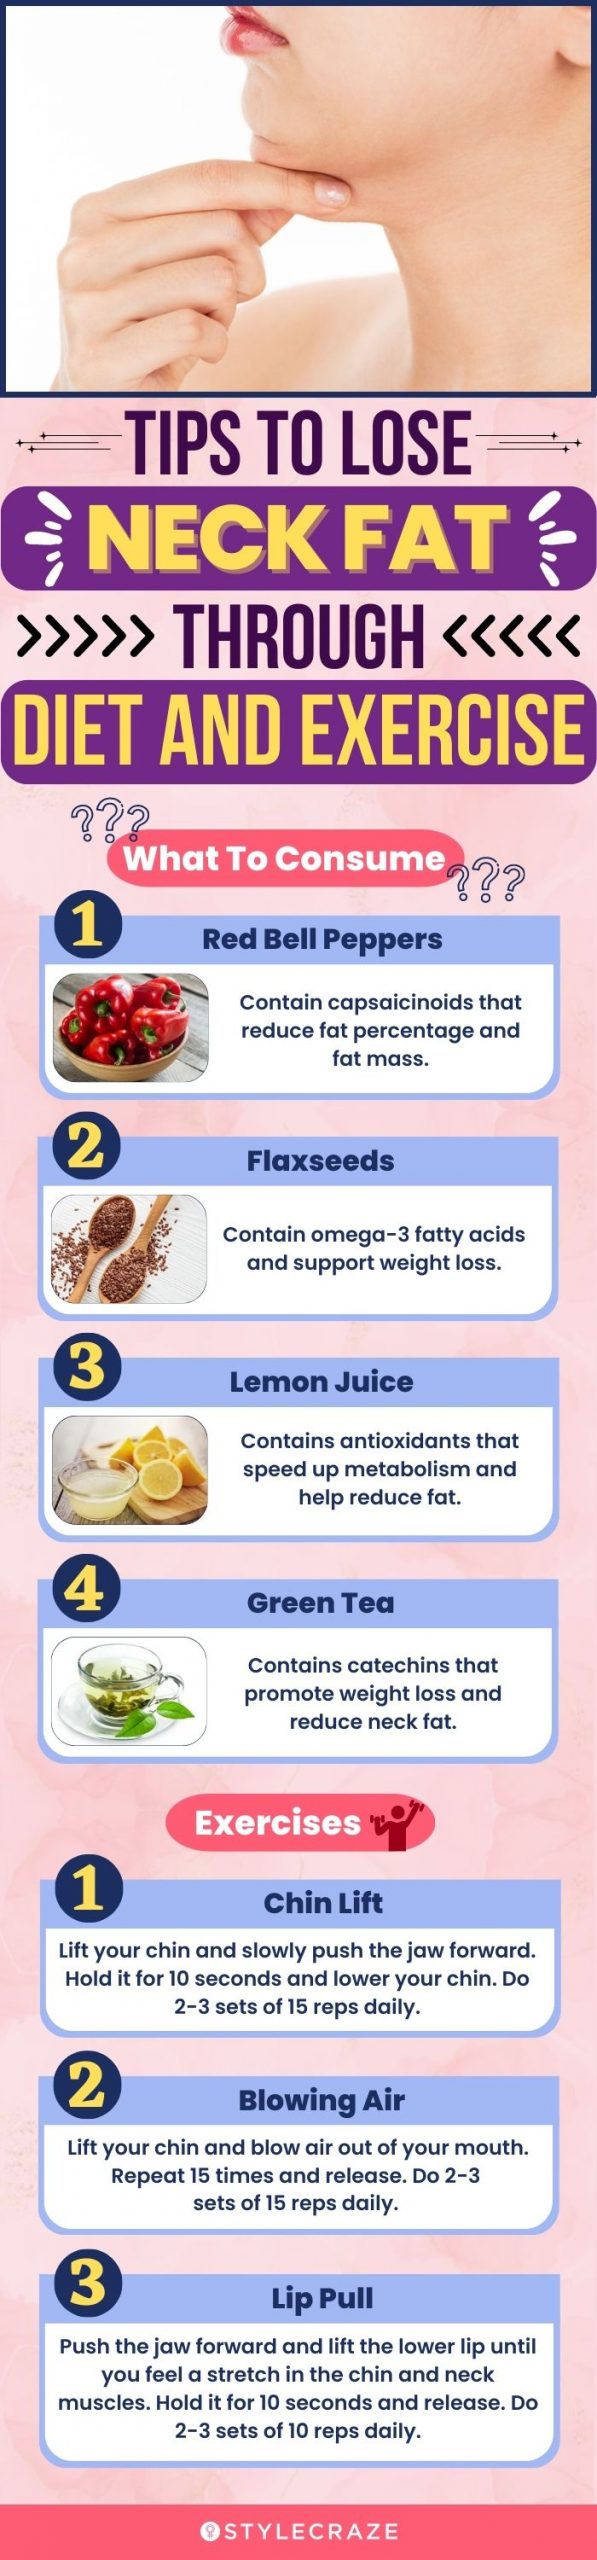 tips to lose neck fat through diet and exercise (infographic)